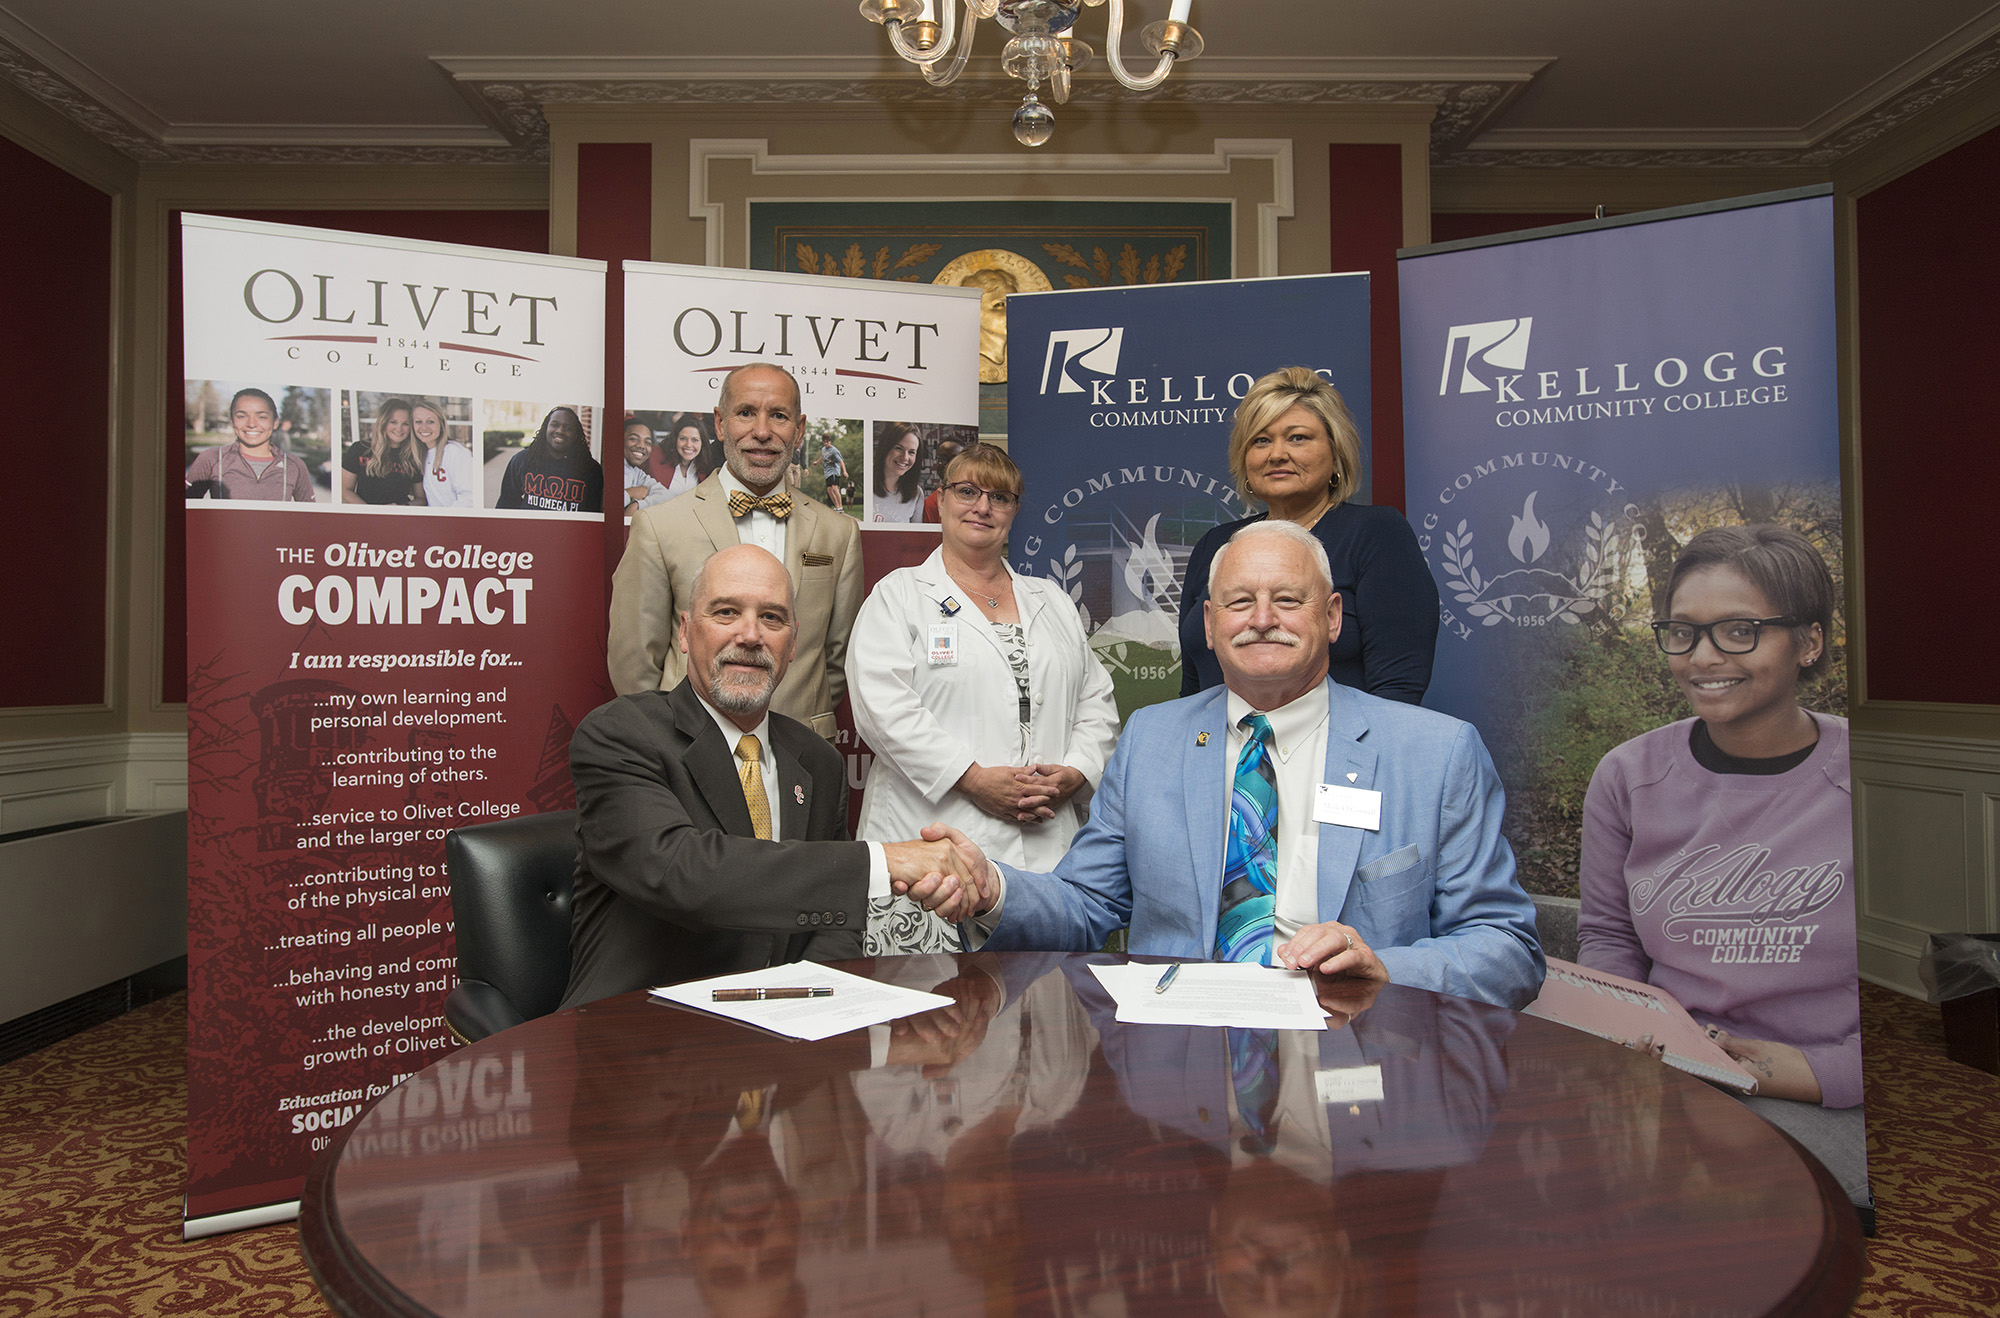 Pictured are, in the front row, from left to right, Olivet College President Steven M. Corey, Ph.D., and KCC President Mark O'Connell. Pictured in the back row, from left to right, are KCC Vice President for Instruction Dr. Kevin Rabineau; Olivet College Director of Nursing Education and Assistant Professor of Nursing Dr. Lorraine Manier; and KCC Dean of Workforce Development Dr. Jan Karazim.